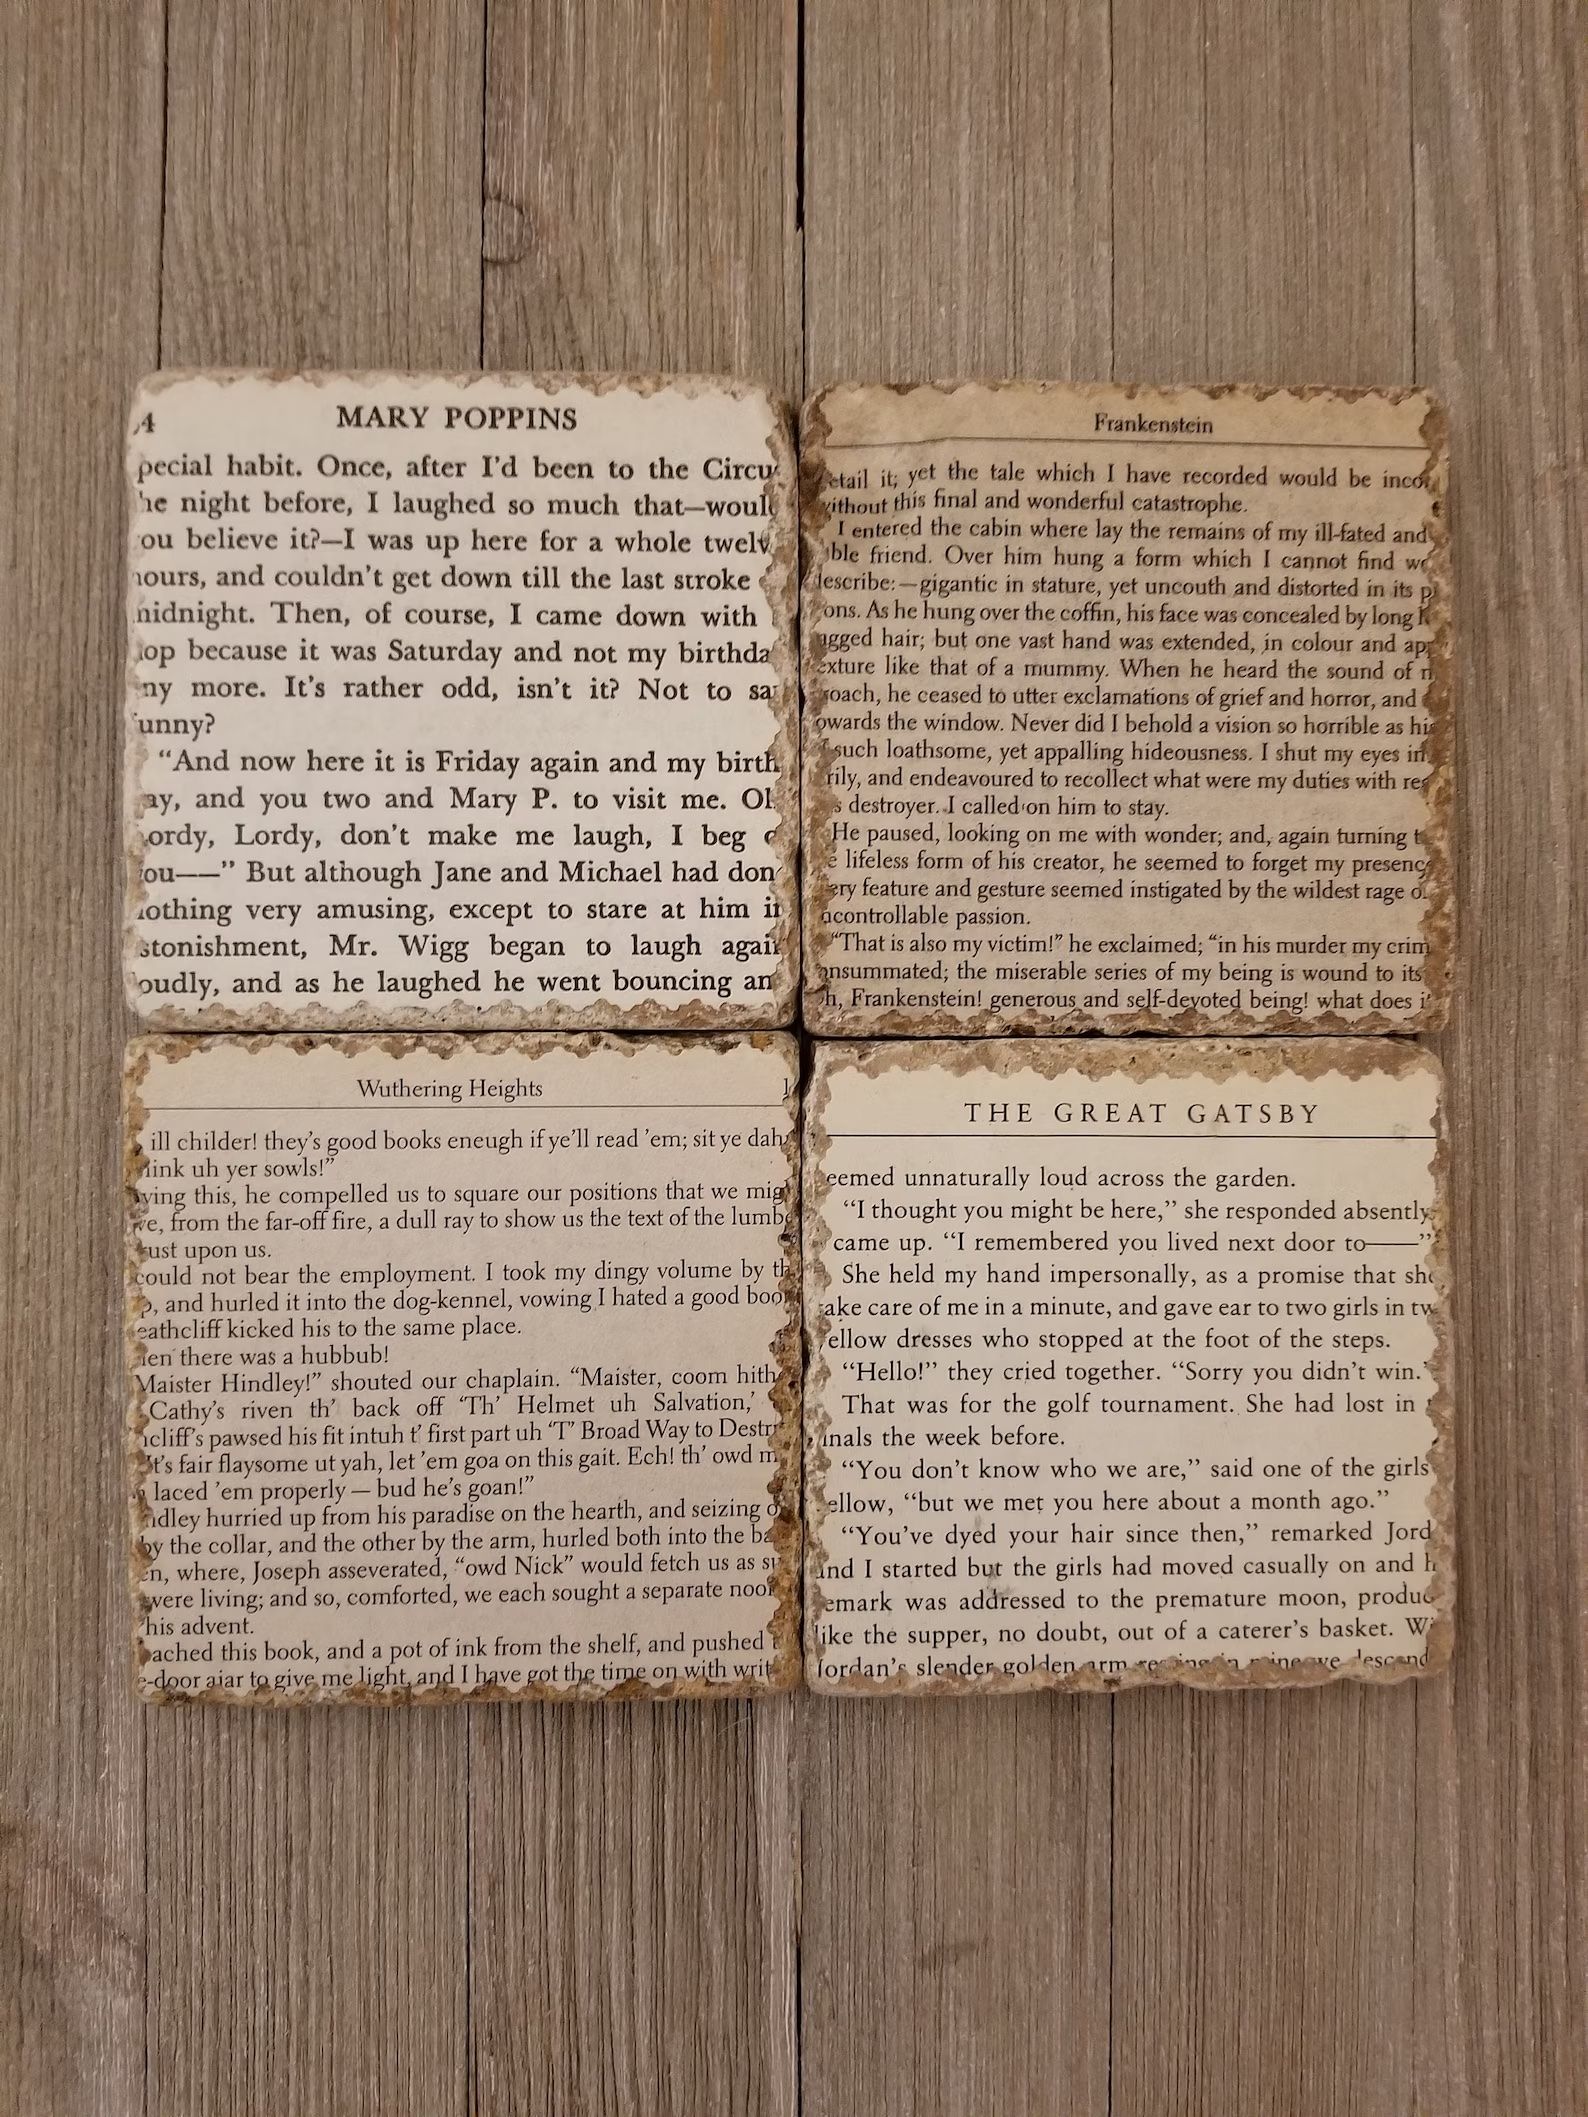 Four coasters with pages from books printed on them are on a wooden table.